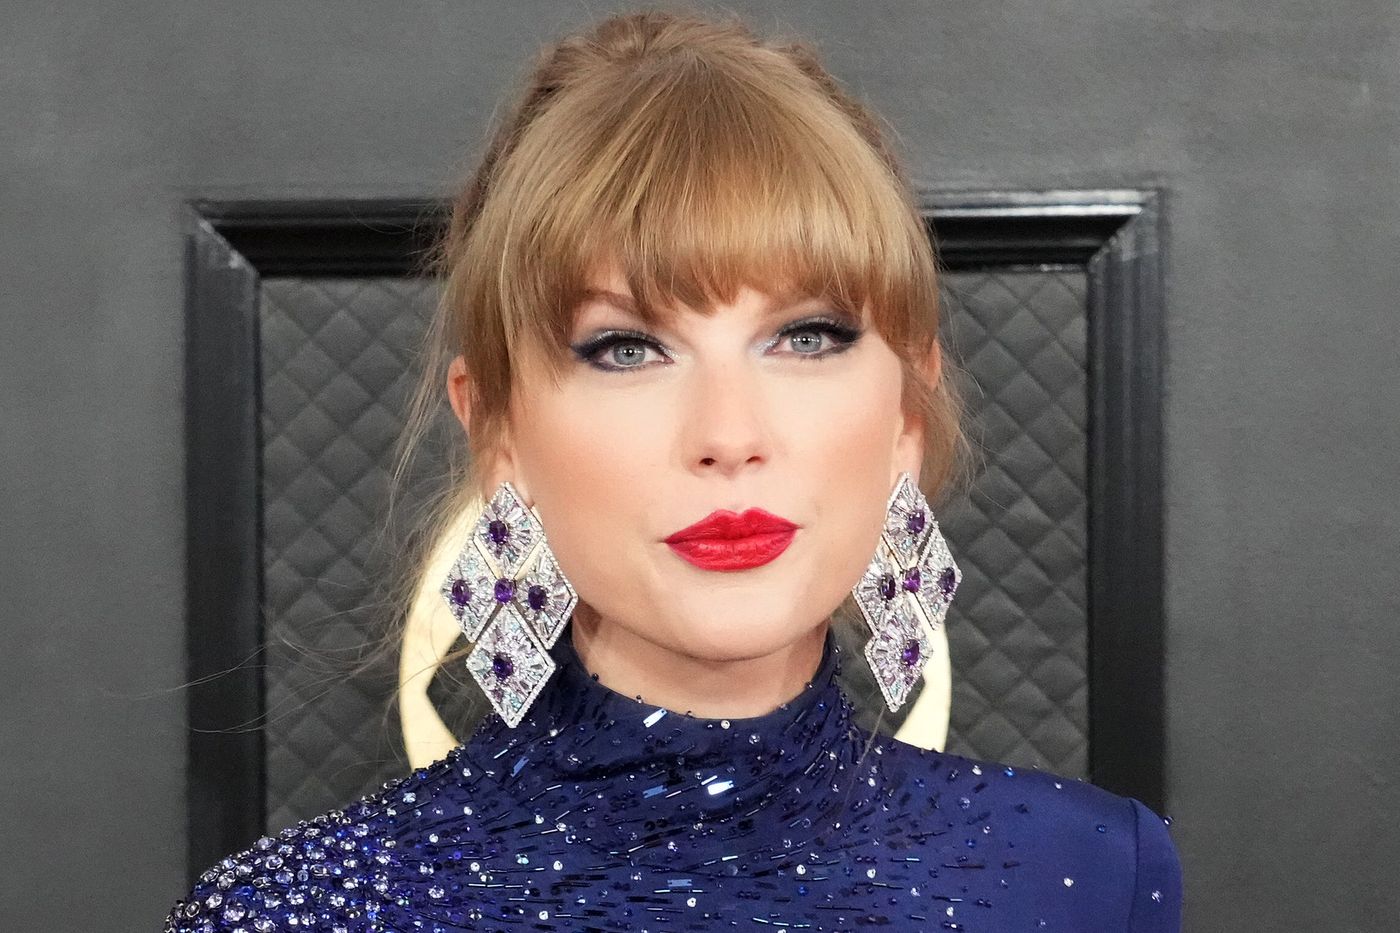 The 9 Grammys Beauty Looks We Are Re-creating ASAP